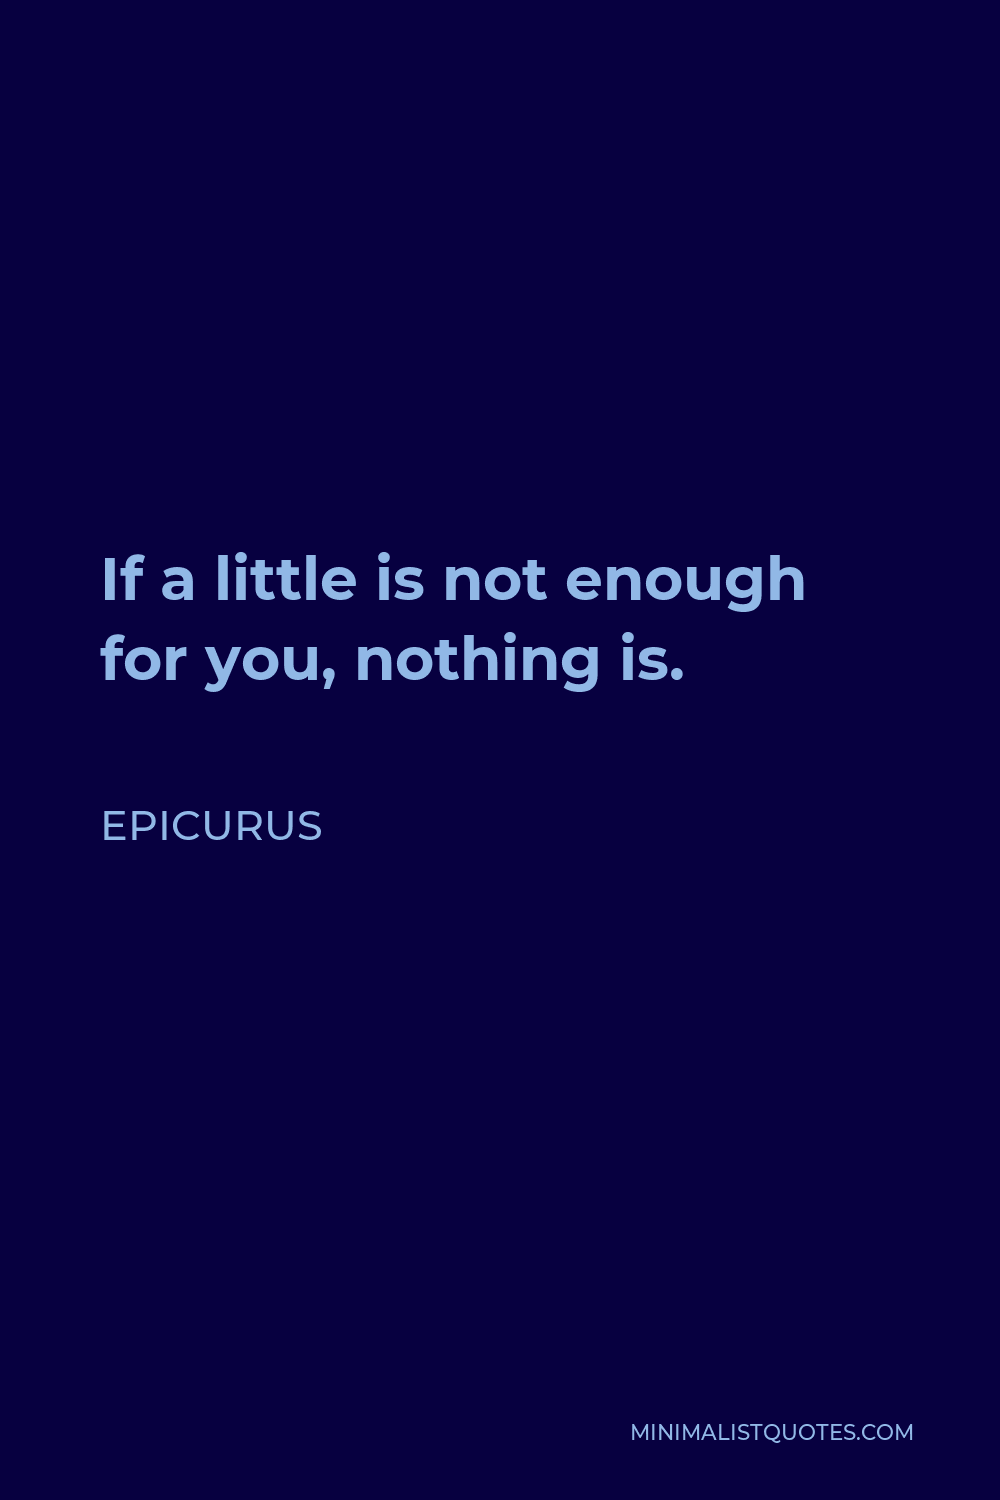 Epicurus Quote - If a little is not enough for you, nothing is.